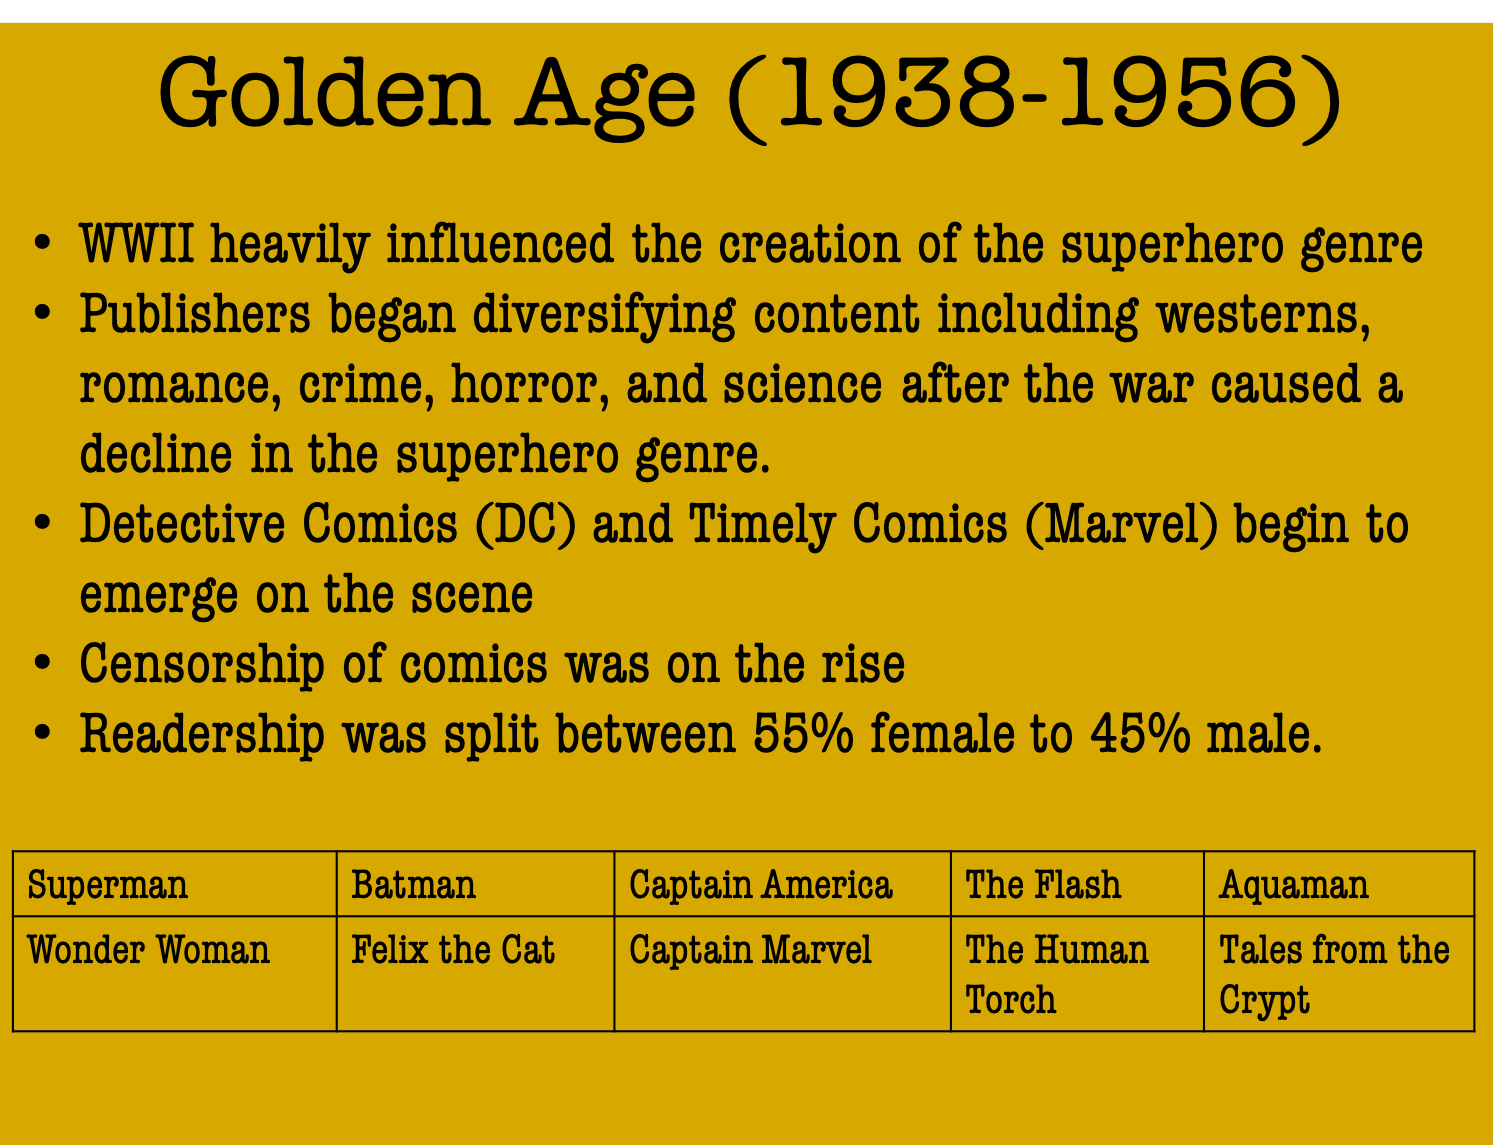 Comic books in the golden age (1938-1956)